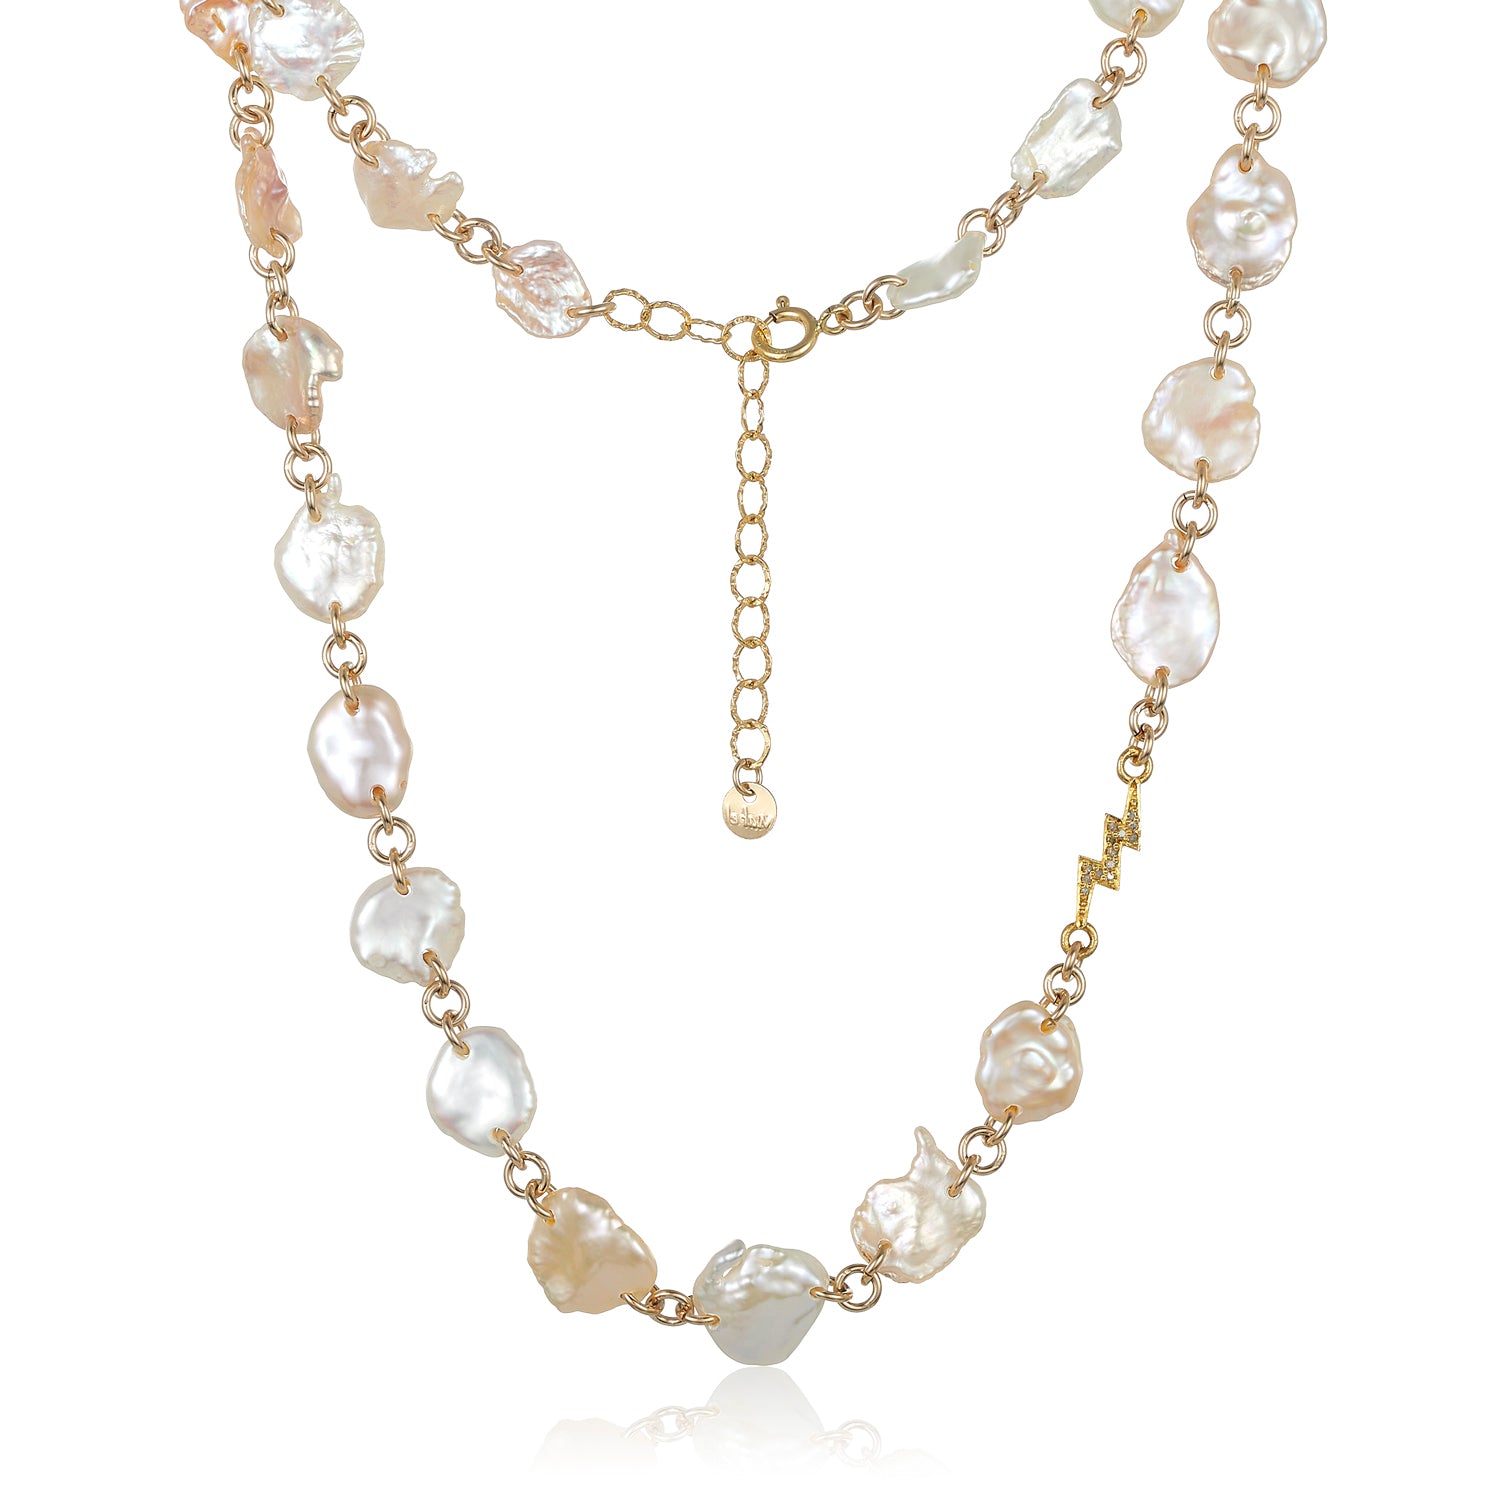 Keshi Pearls Necklace in White & Tahitians with Round Golden South Sea –  Judi McCormick Jewelry